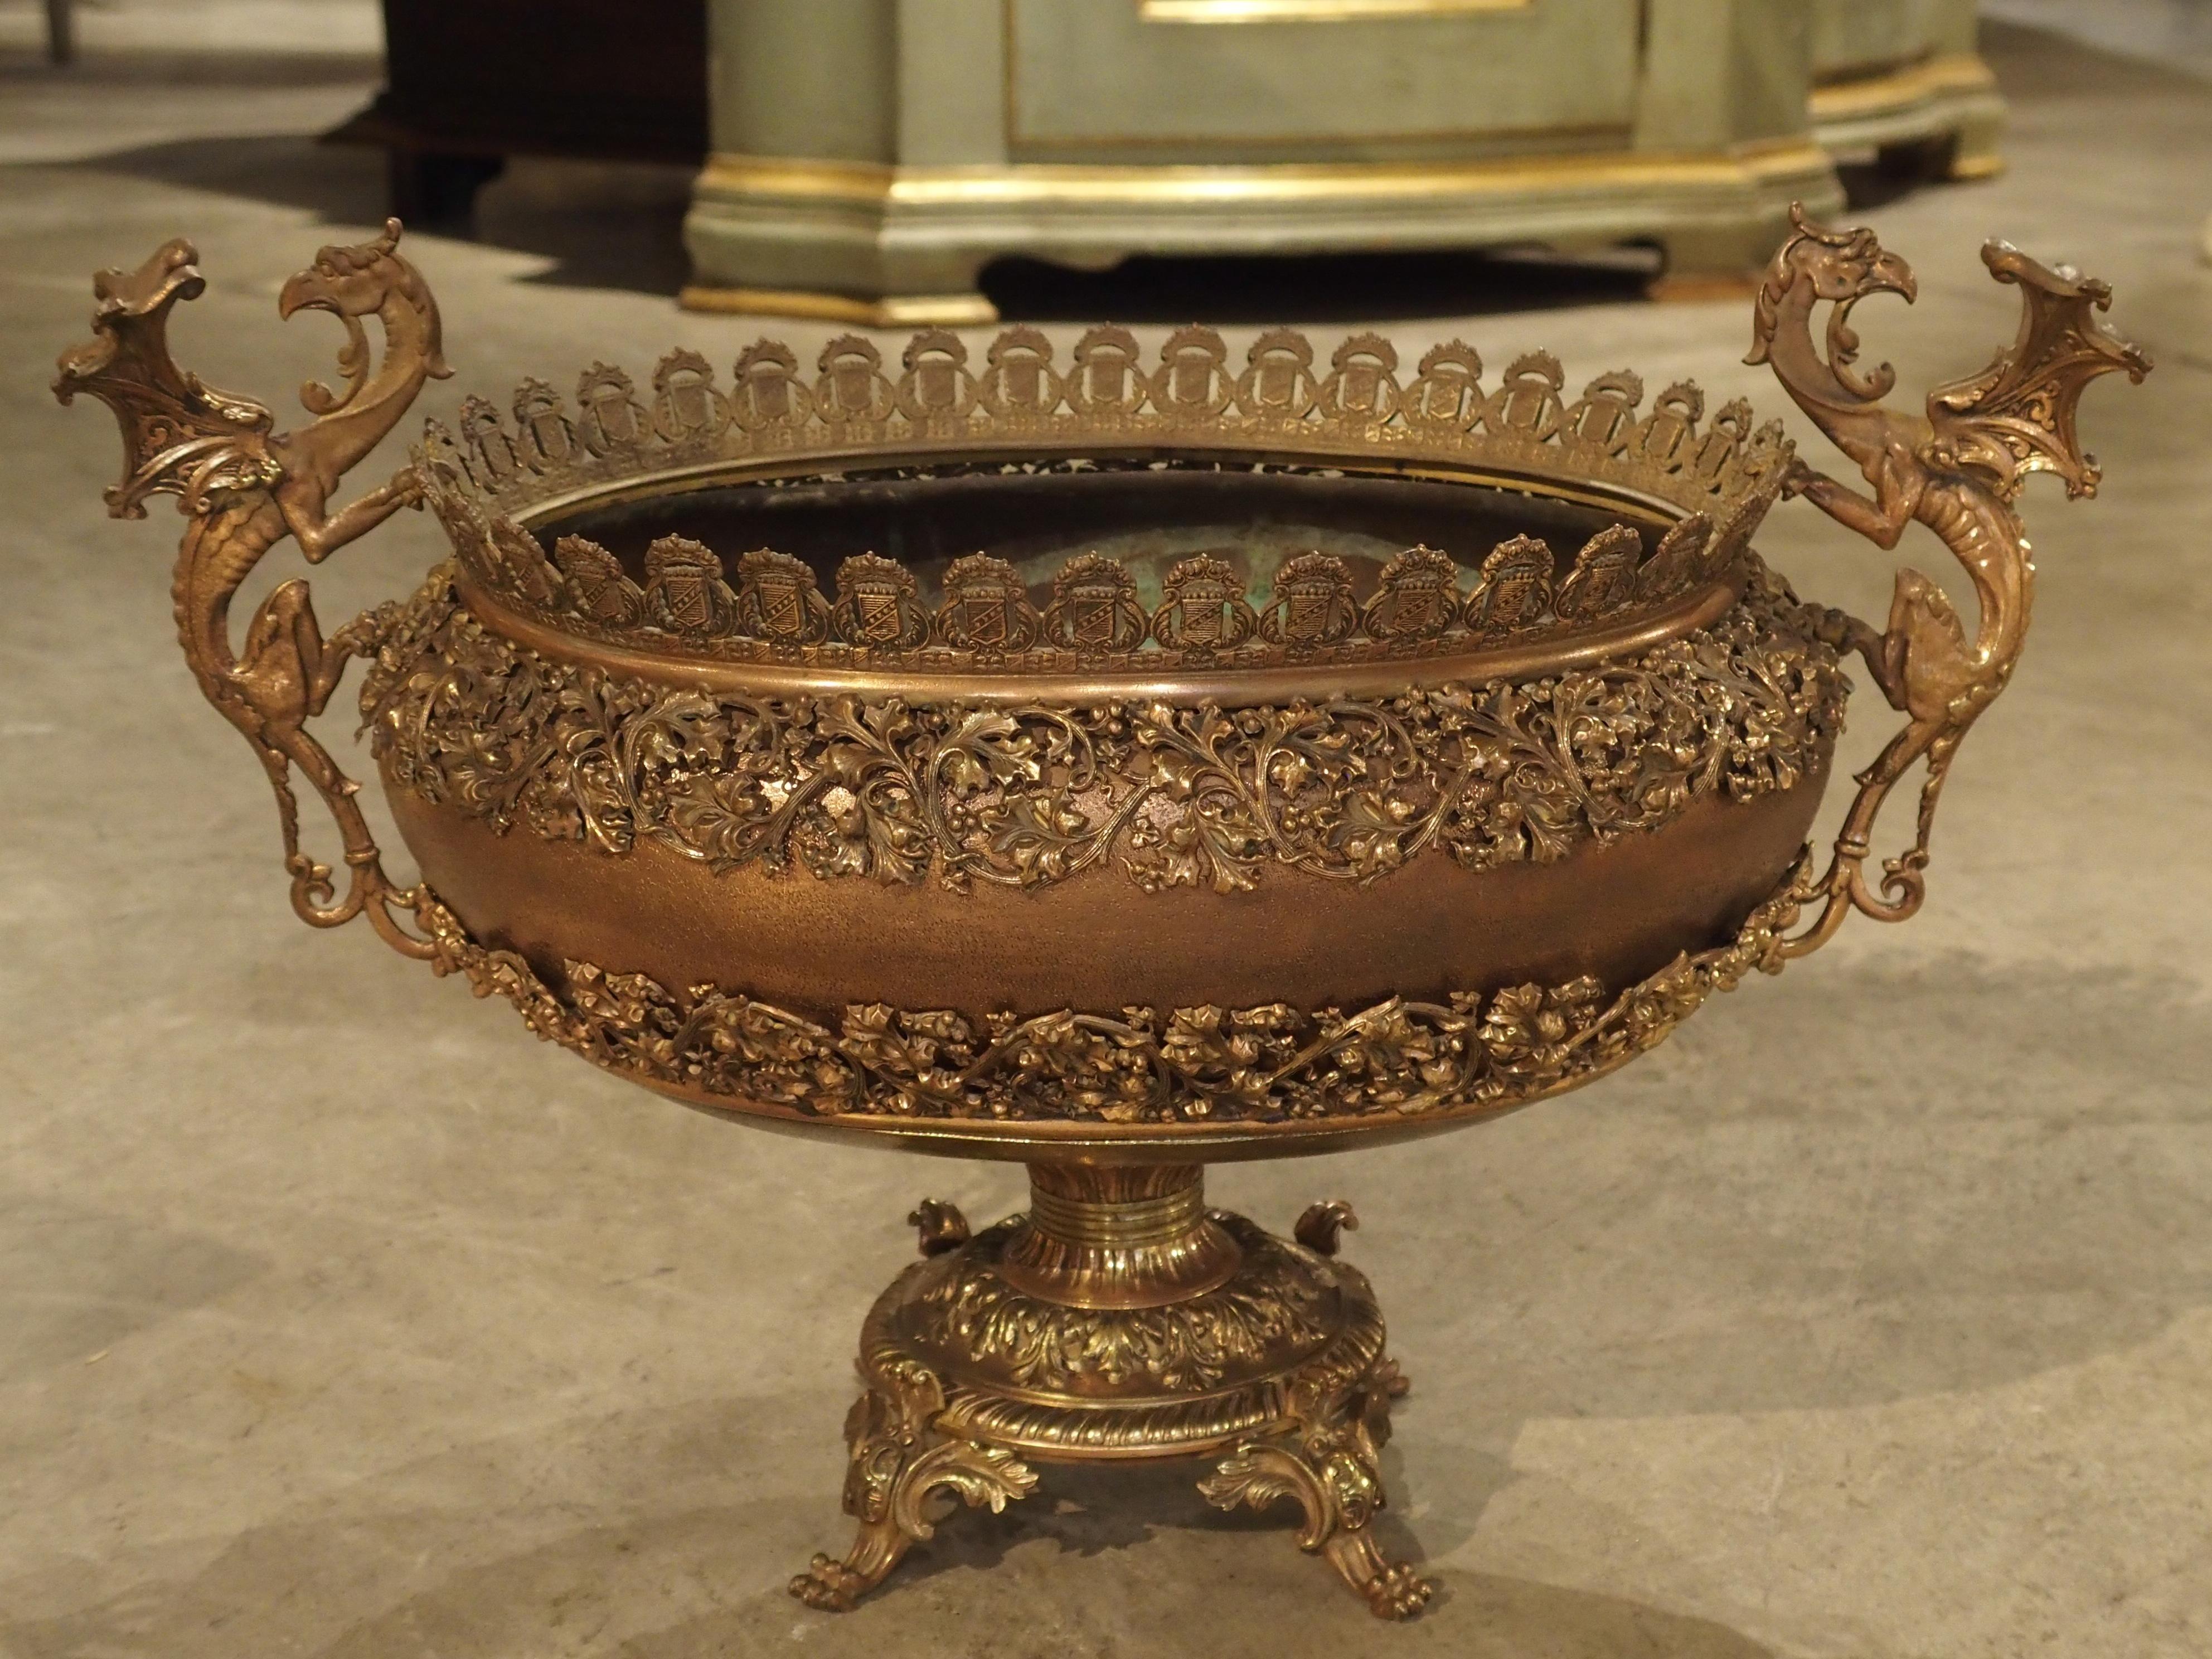 French Antique Copper, Bronze, and Mixed Metal Planter from France, Early 1900s